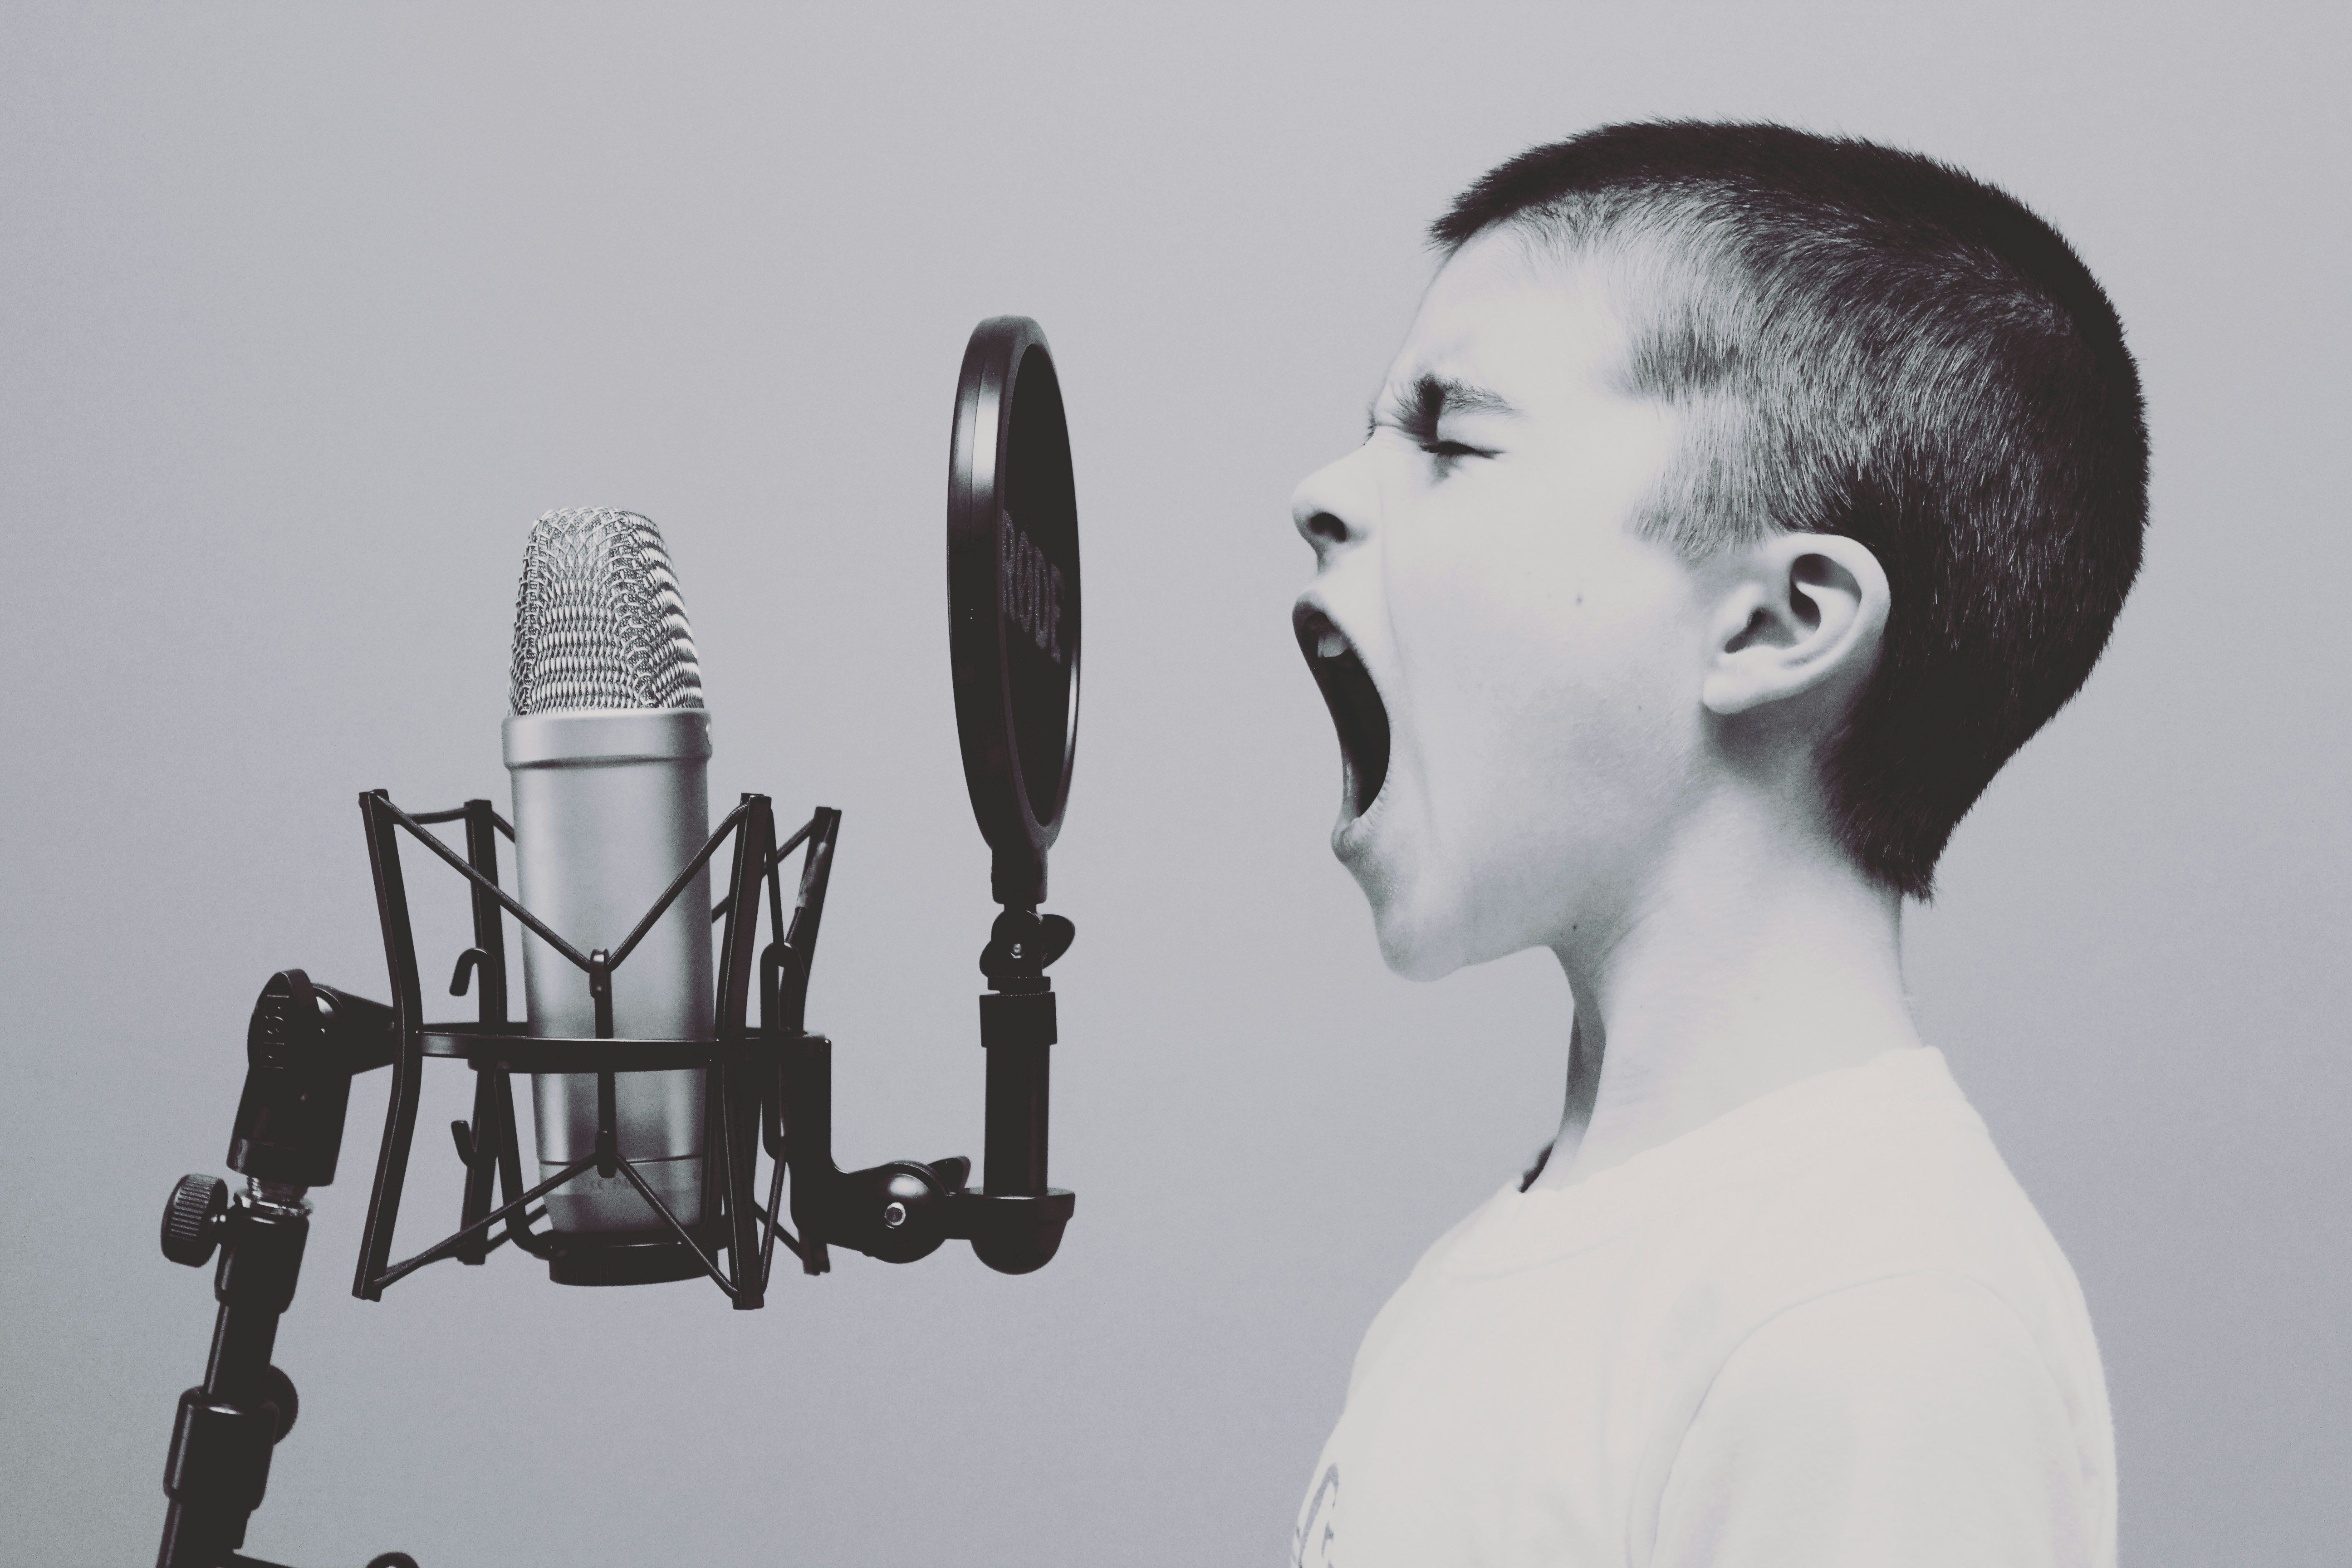 Black and white shot of young kid hollering into a microphone